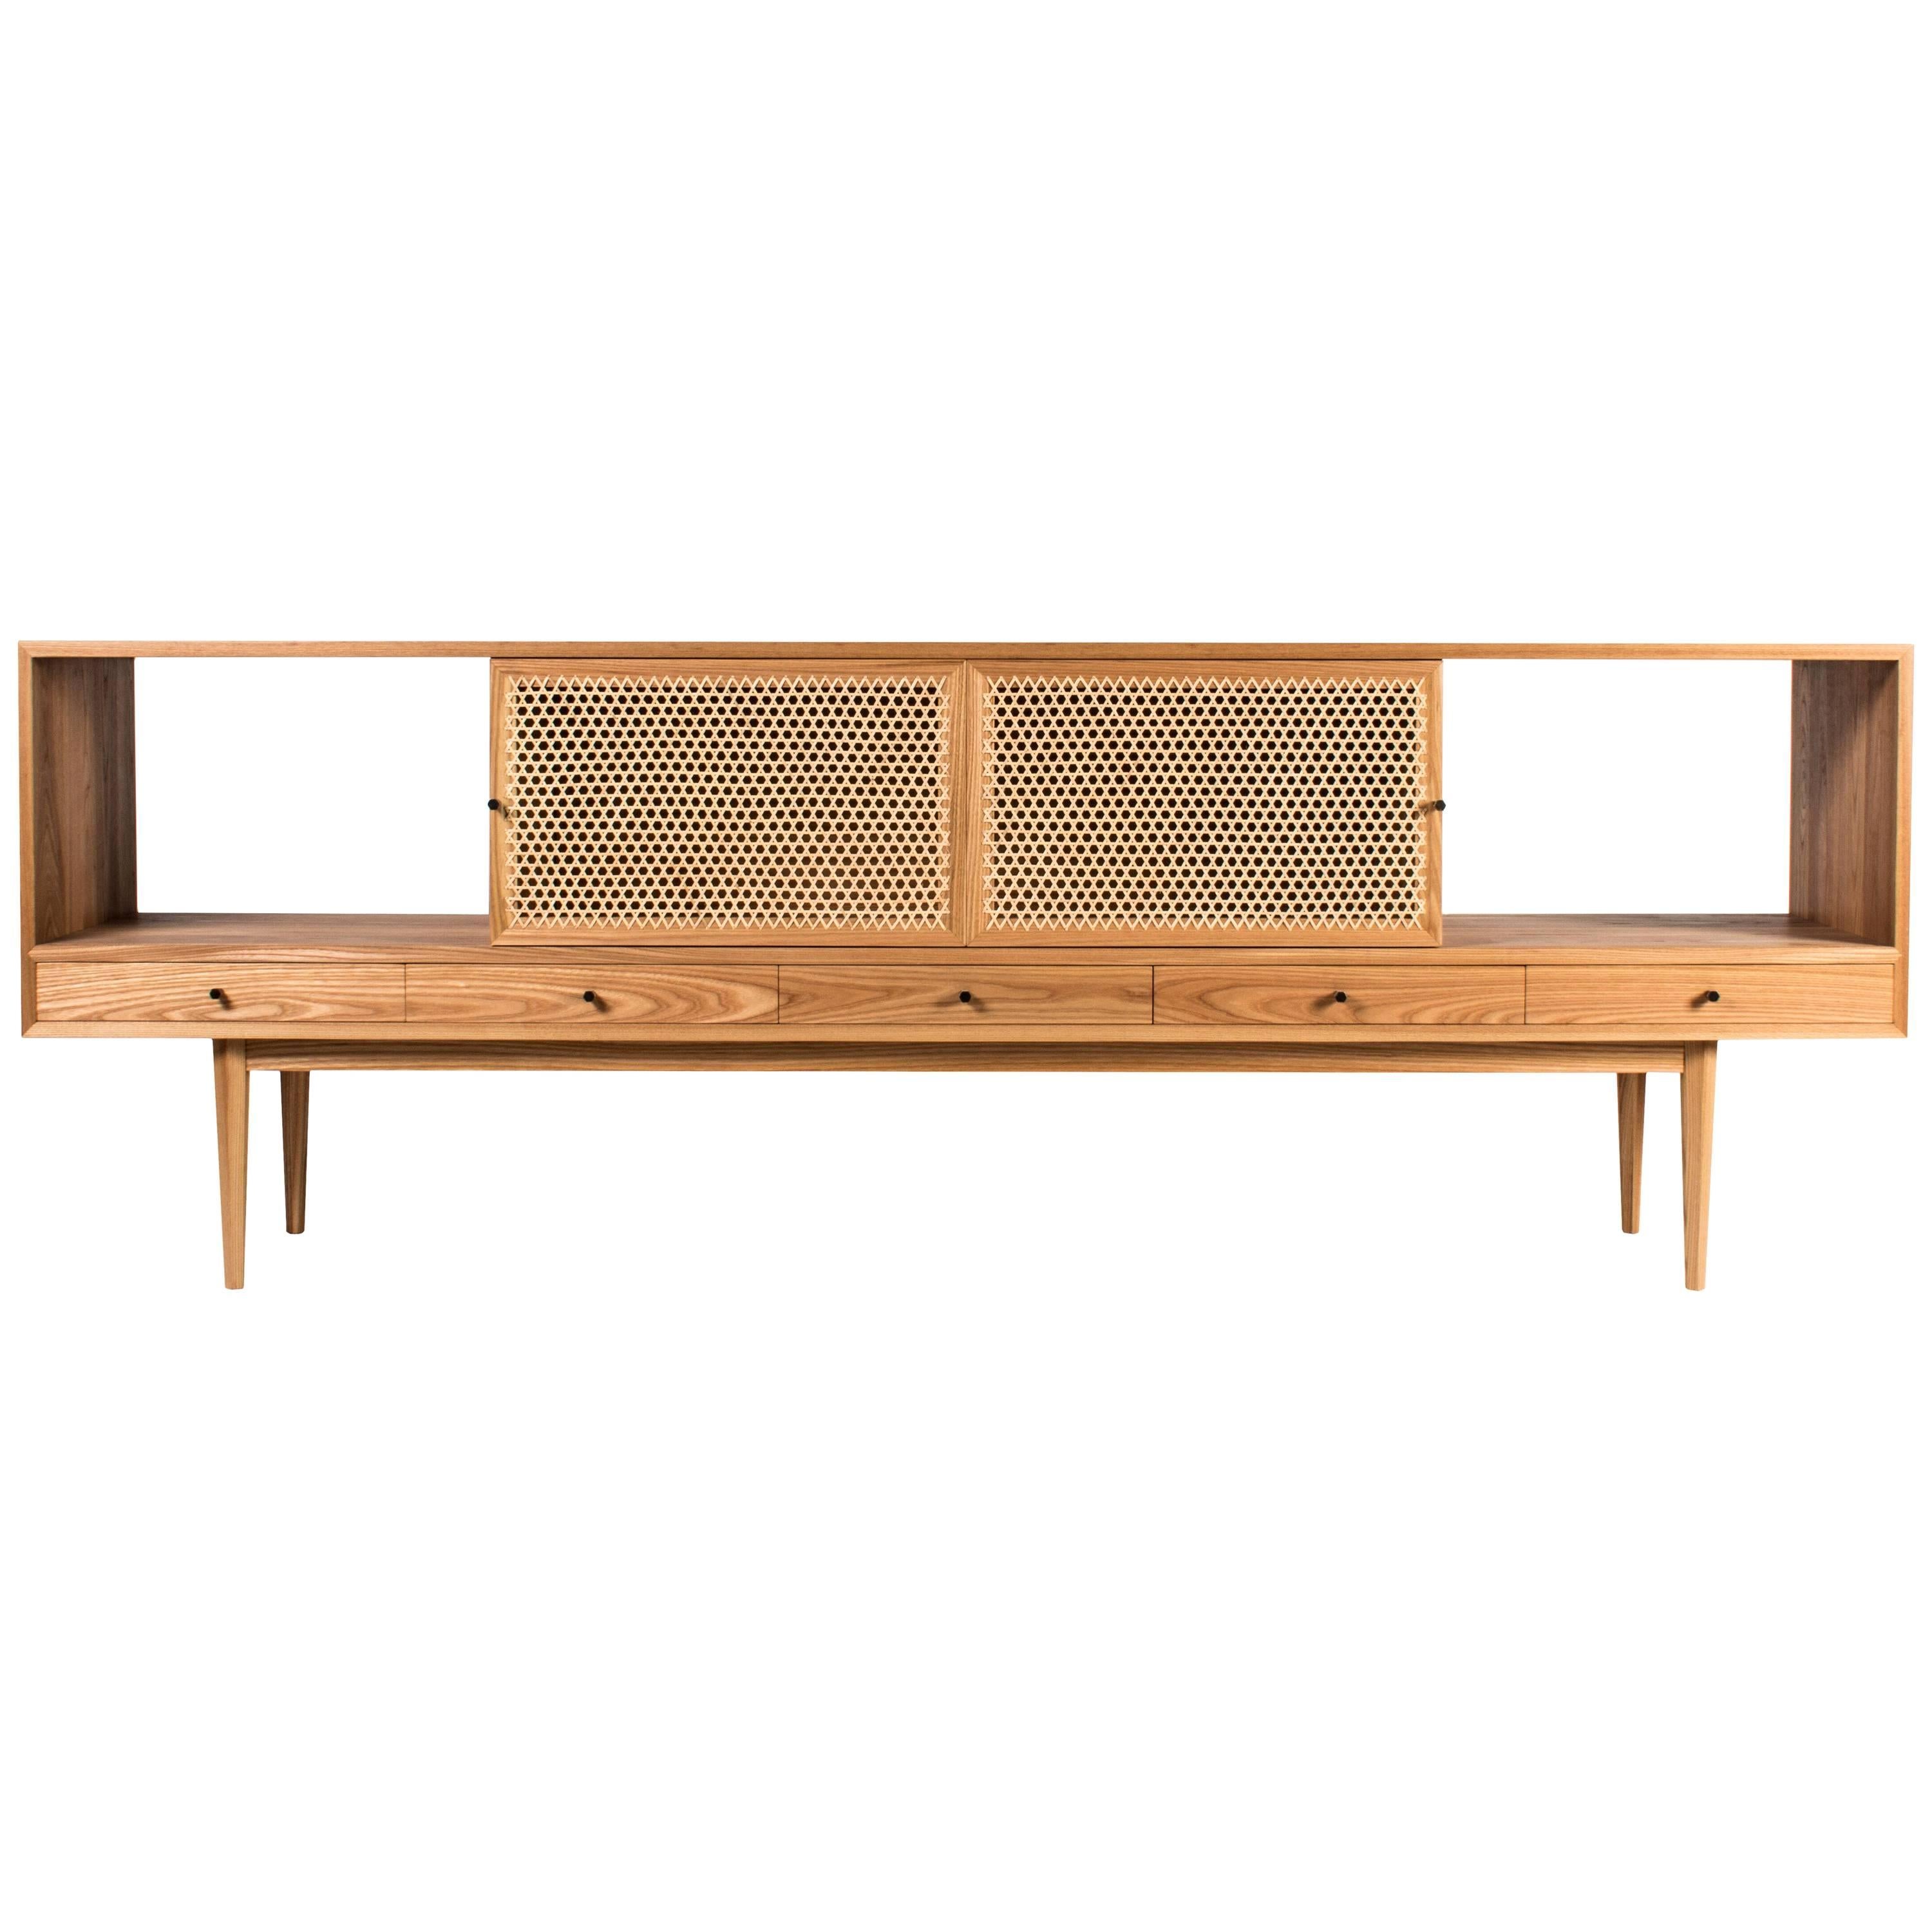 Tinselor Cabinet by Tretiak Works, Elm Credenza with Handcrafted Cane Doors